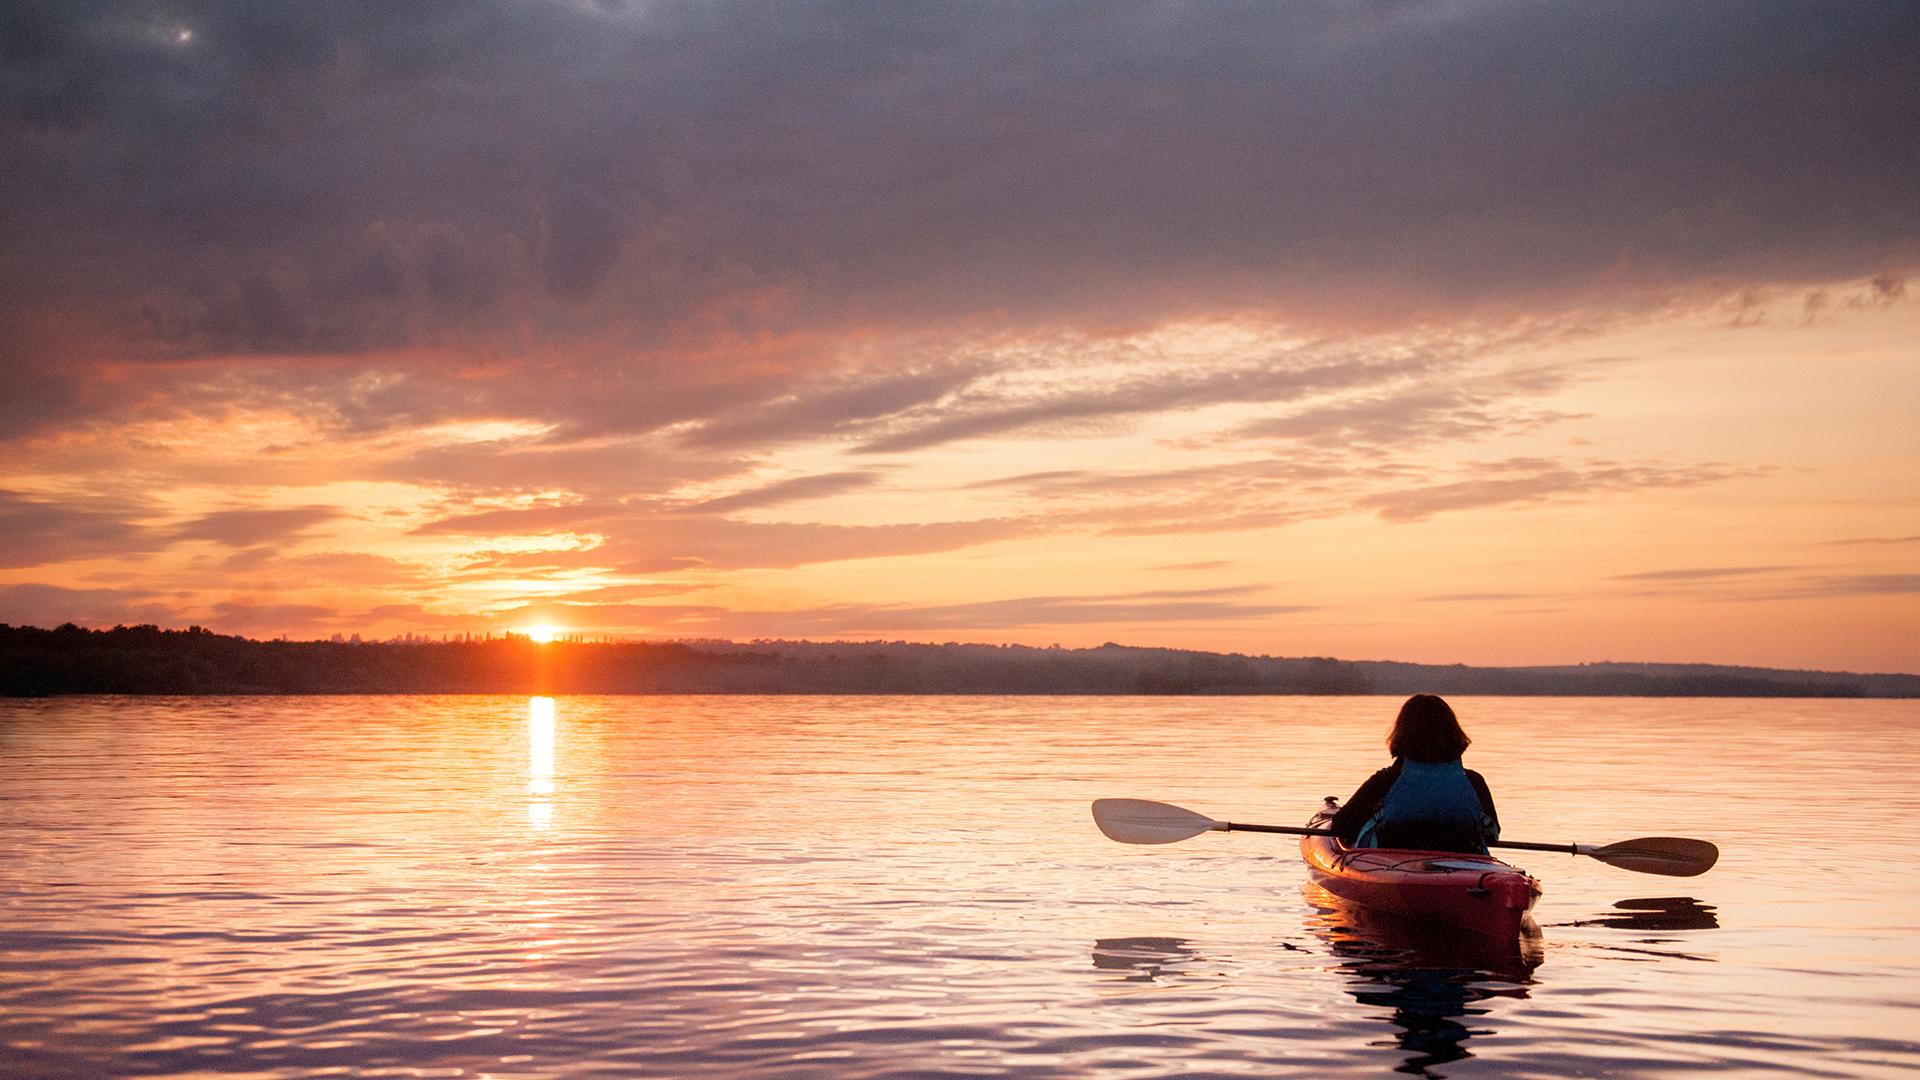 A person relaxing in a kayak while admiring a setting sun.